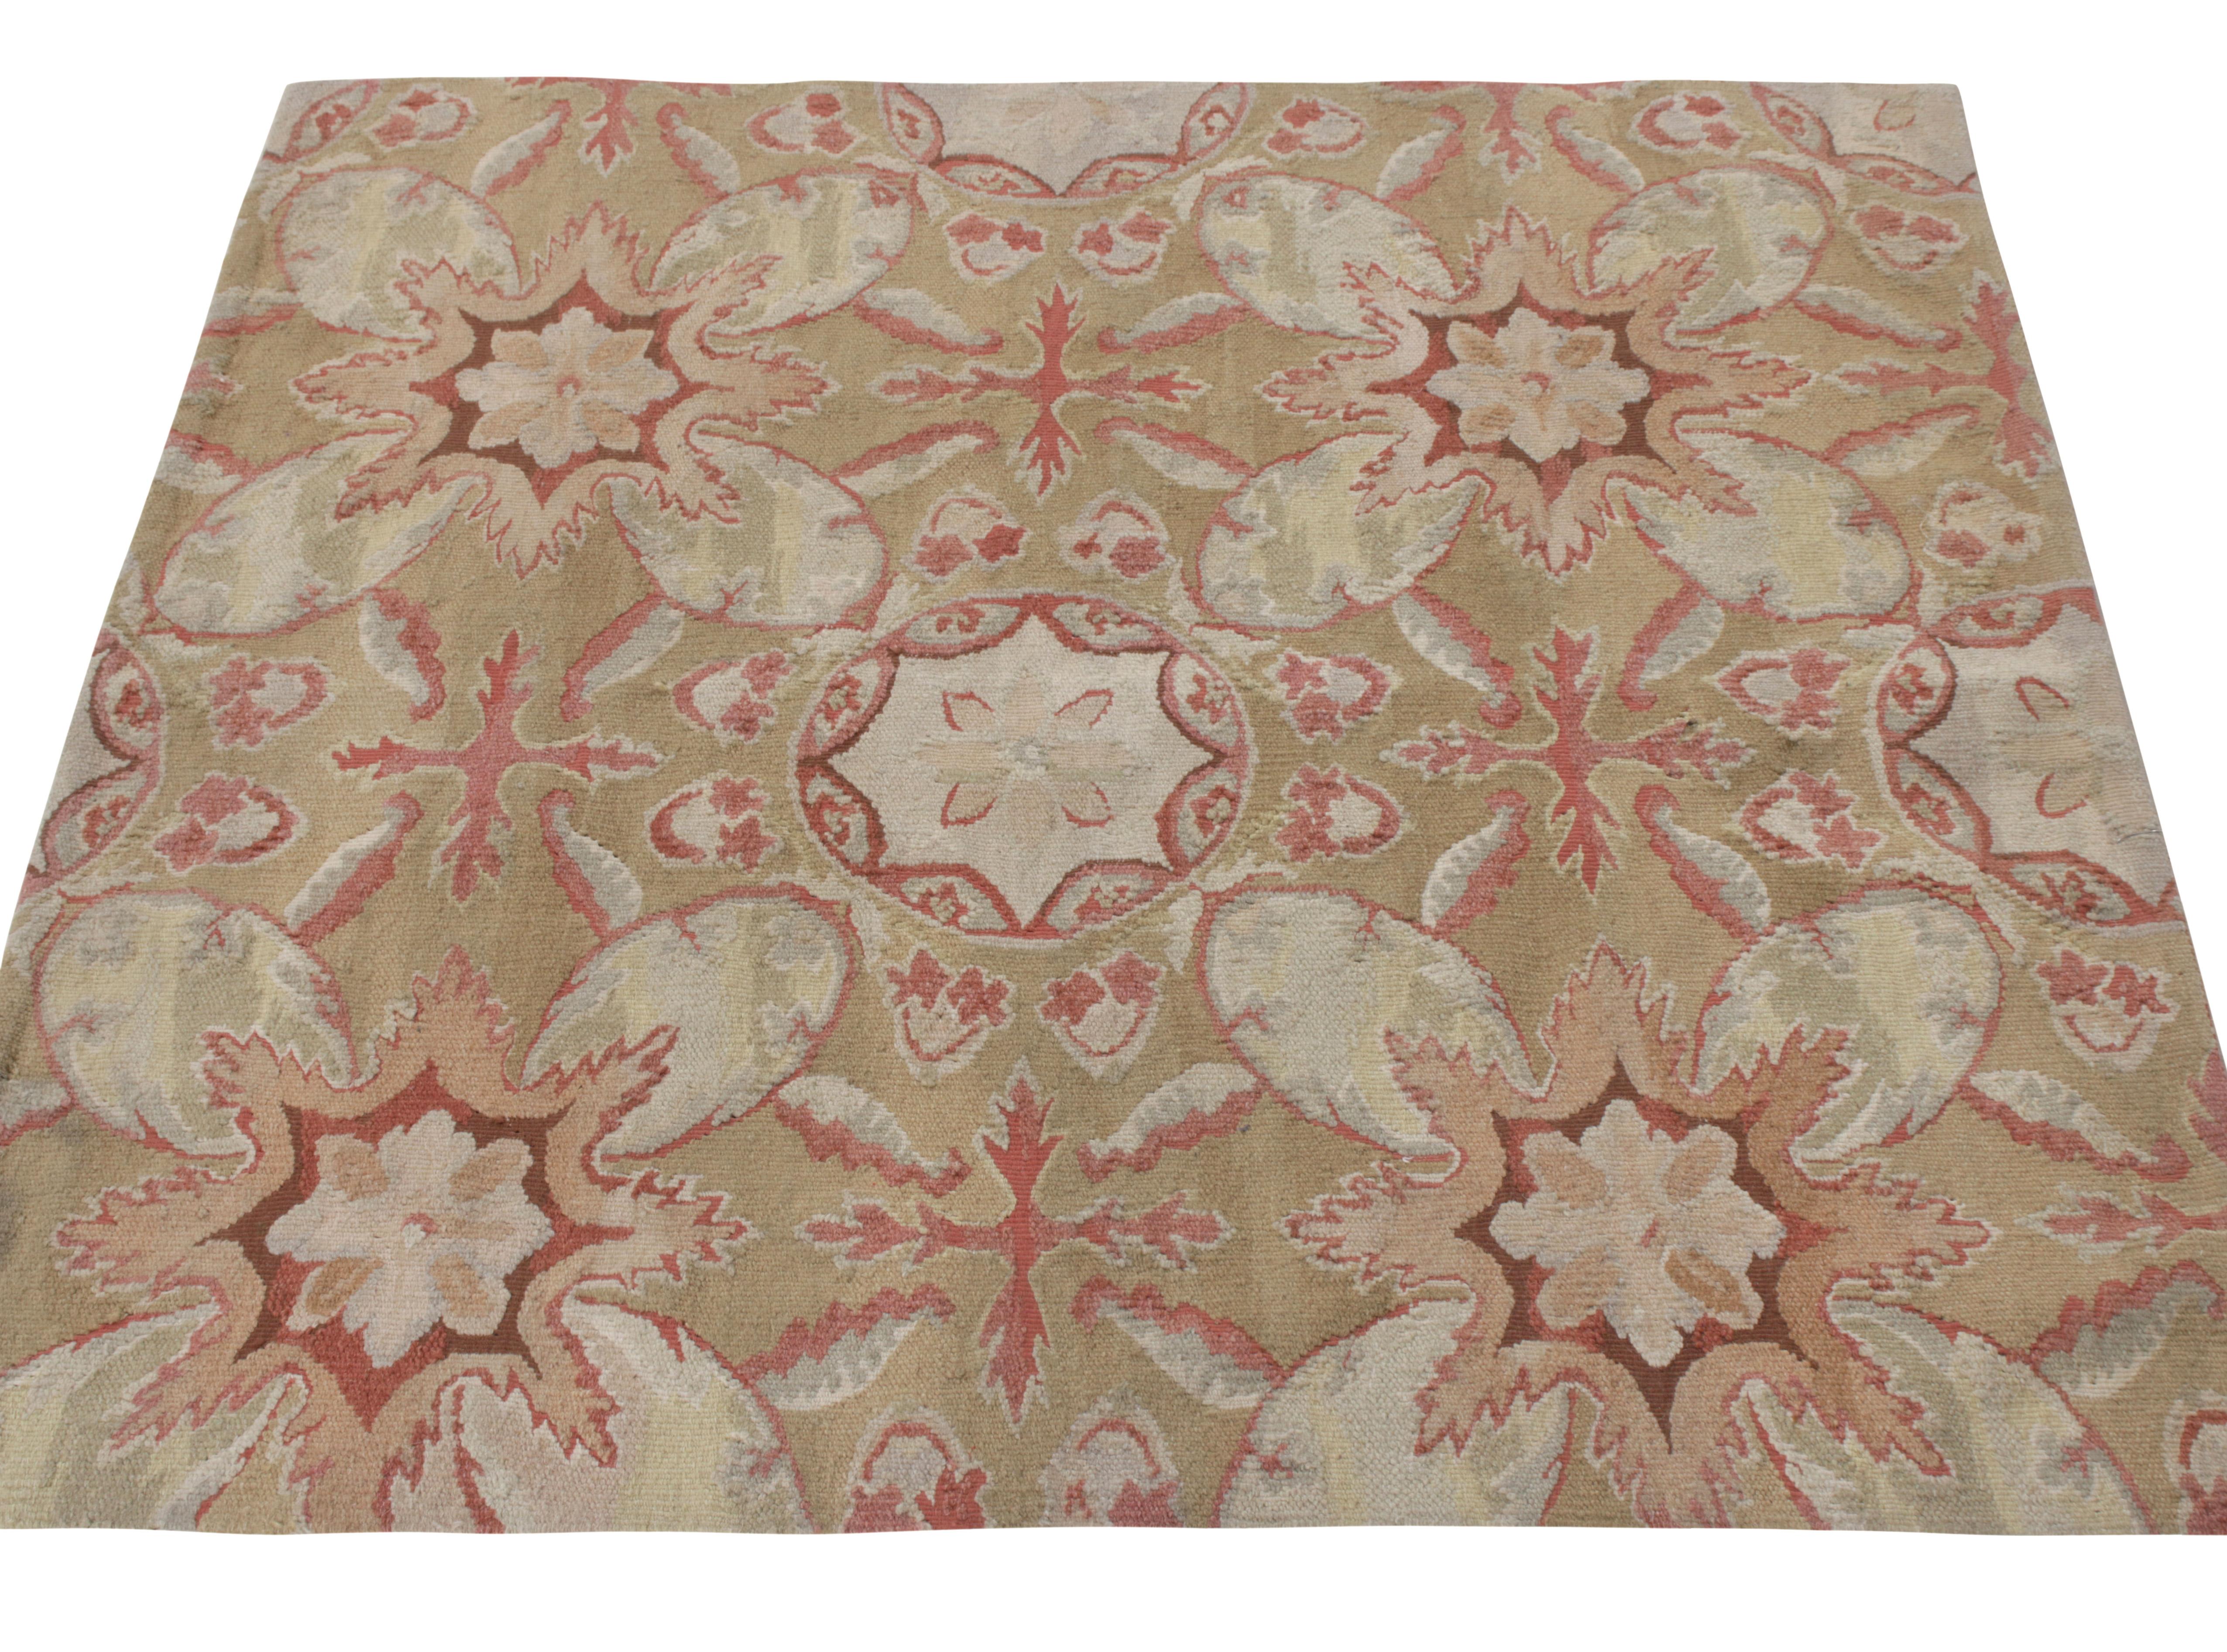 A square sized piece celebrating the 18th-century Aubusson tapestry weave styles, joining Rug & Kilim’s coveted European Collection. Hand wovem in wool and exemplifying neoclassical elegance, the rug features a gorgeous floral patterns in pink,